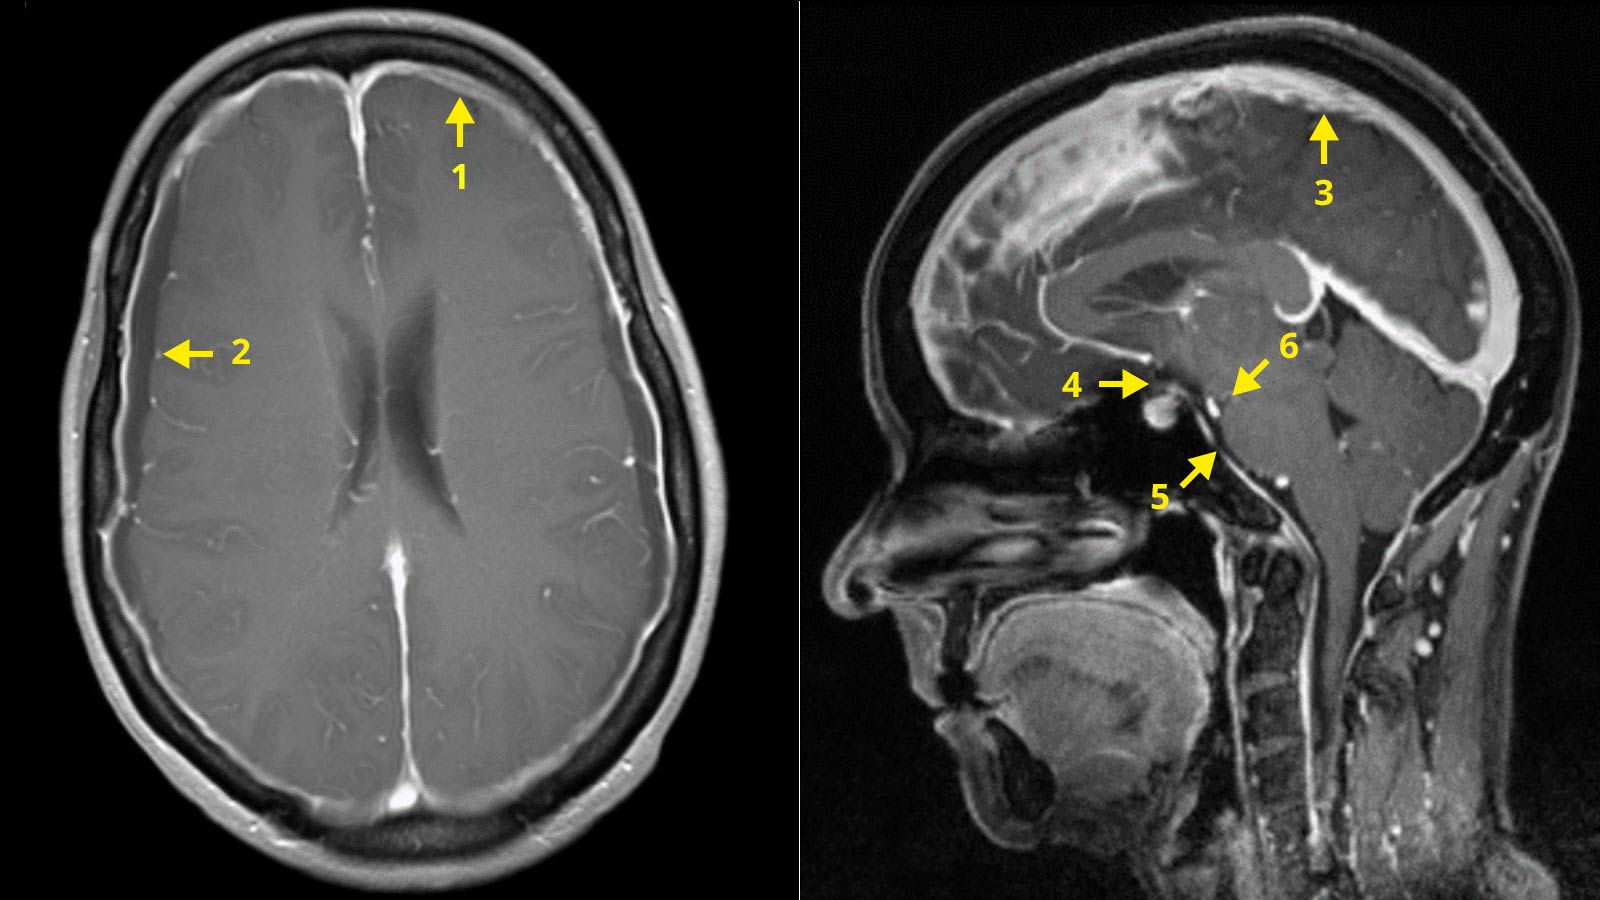 Assessment scheme of the Inselspital illustrated by 2 MRI images of a skull